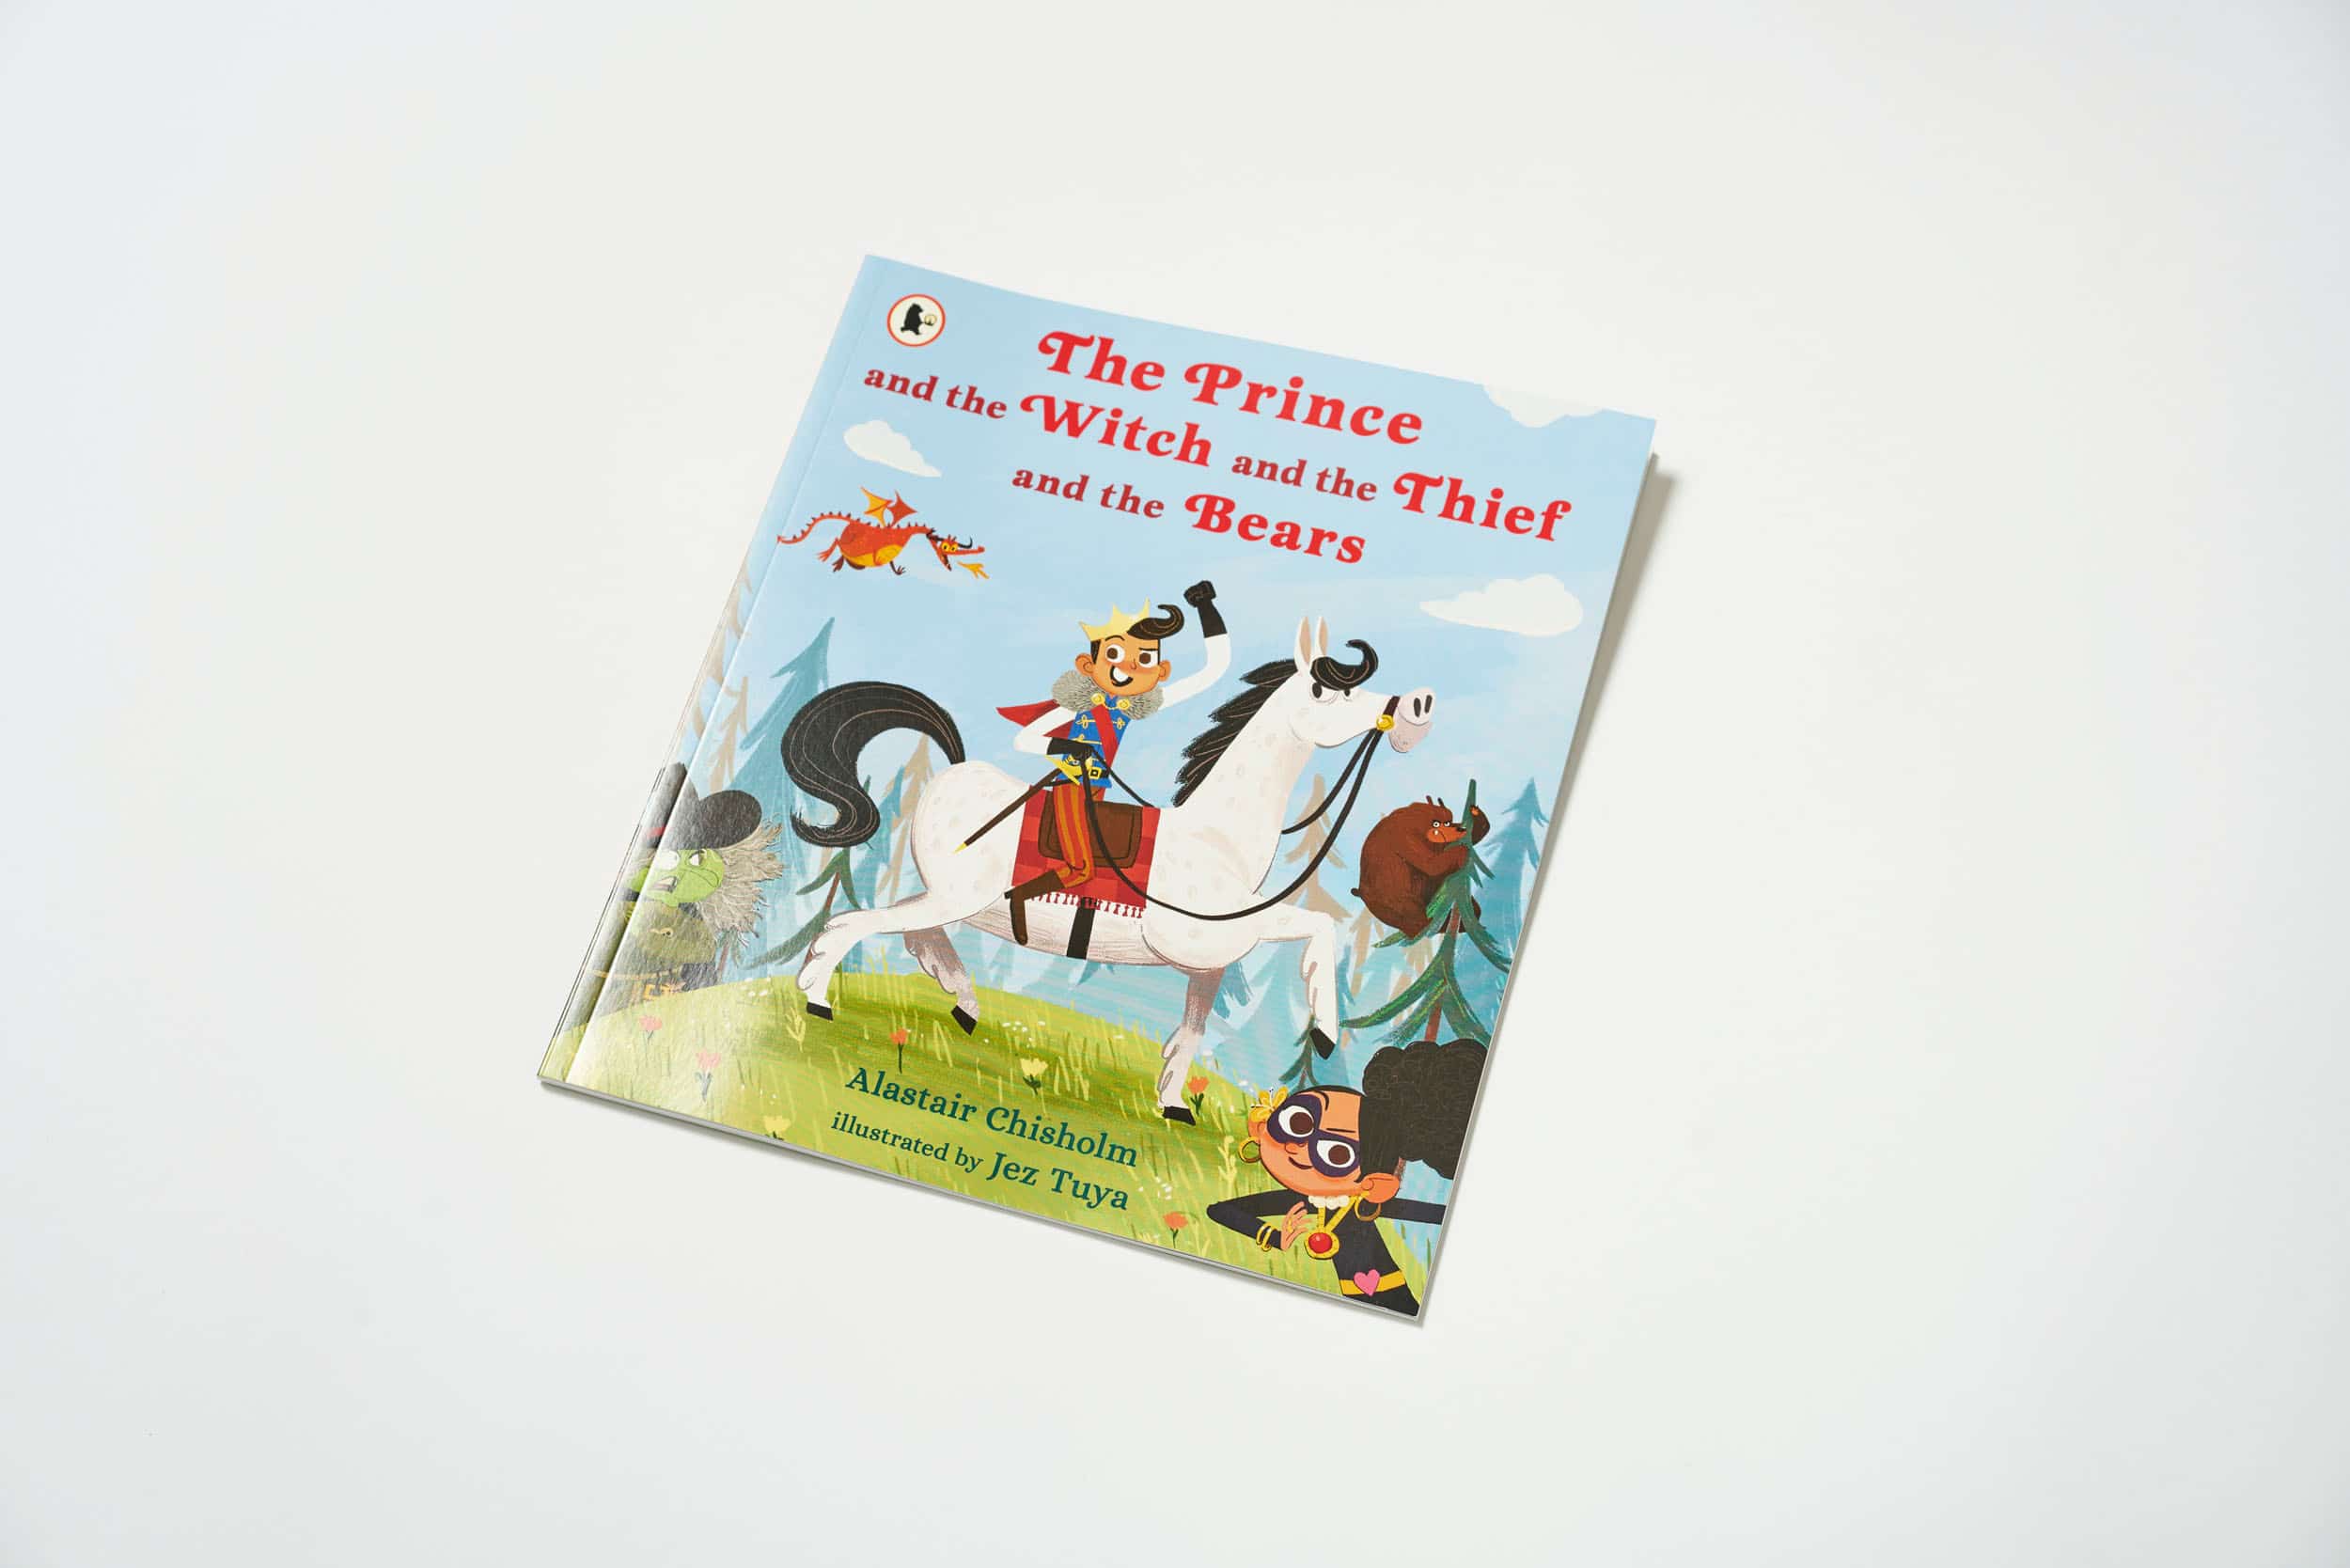 Image of a book called 'The Prince and the Witch and the Thief and the Bears' with an illustration of someone riding a horse on the cover.